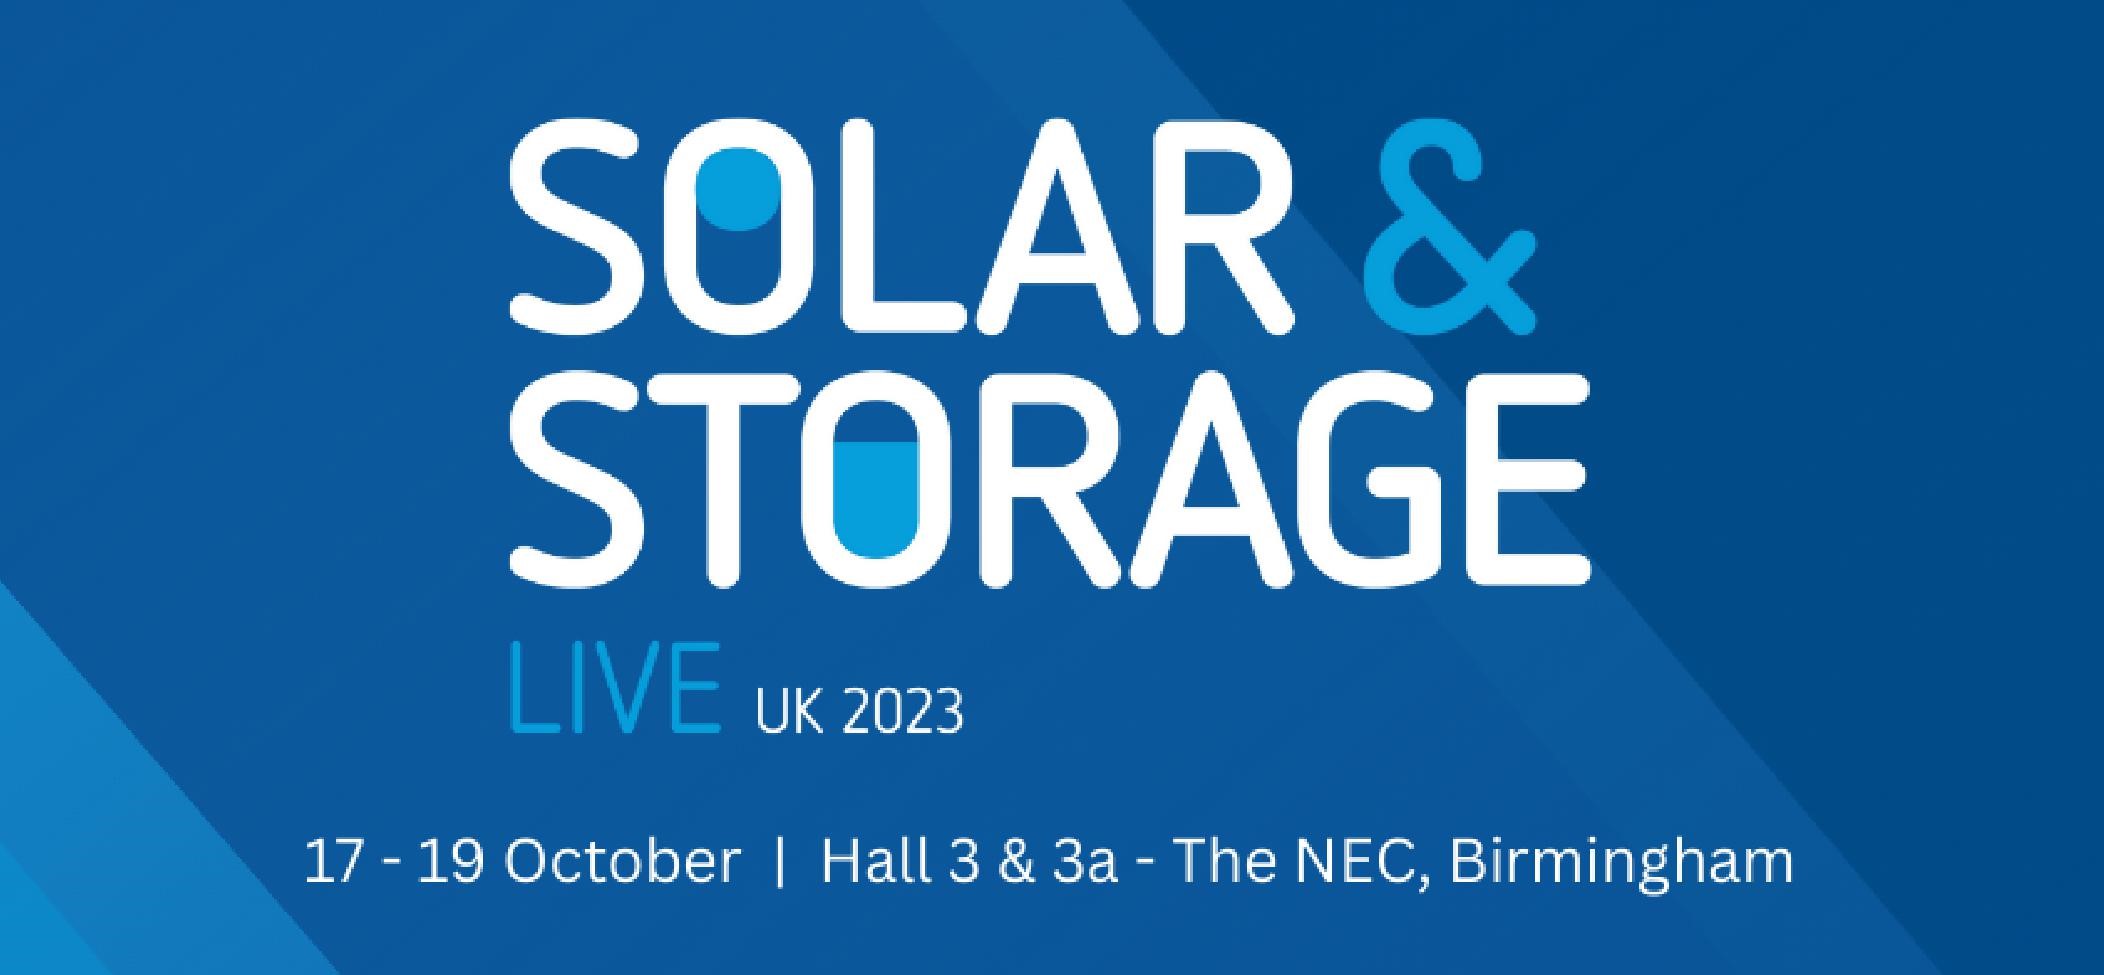 See the latest shingled solar technology at the Solar & Storage Live Exhibition